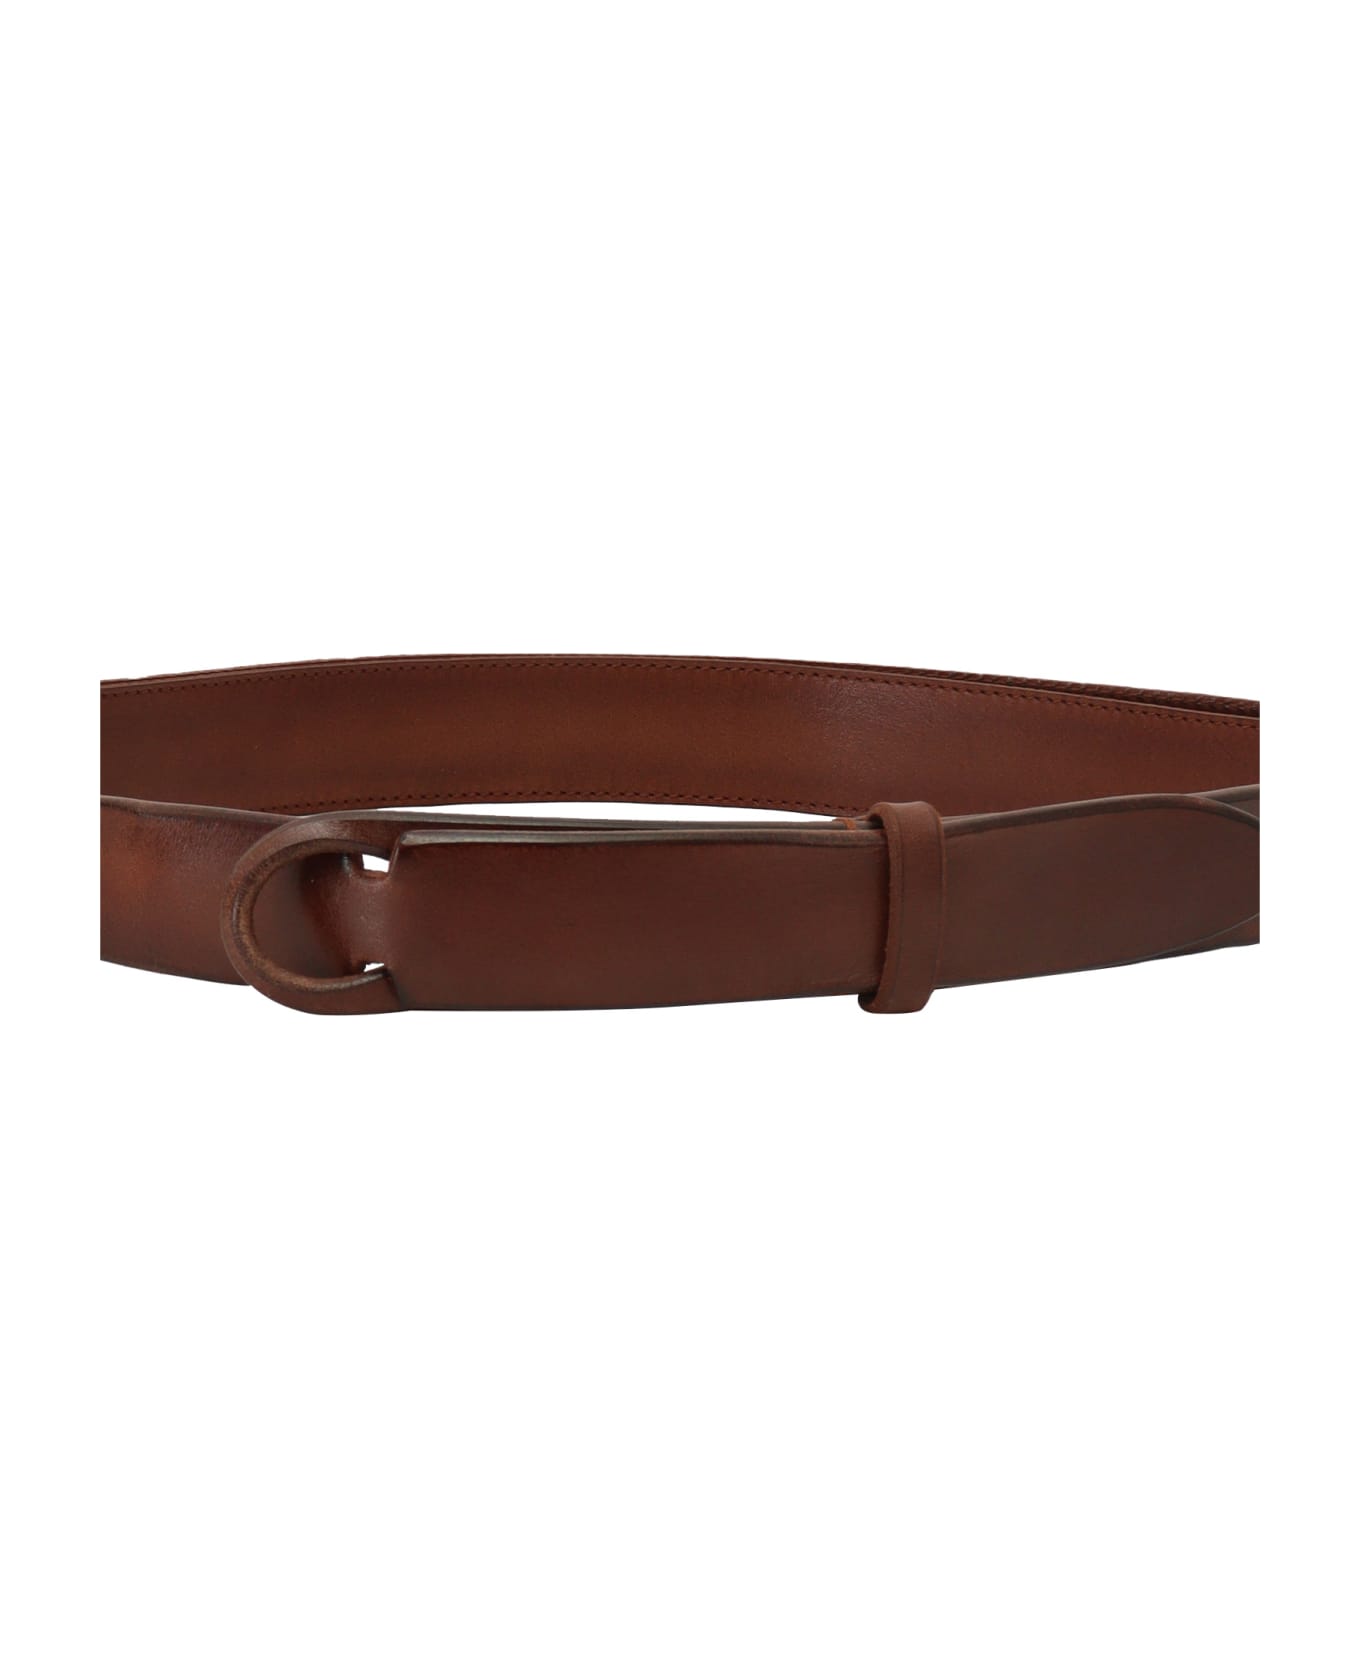 Orciani No Buckle Belt - BROWN ベルト